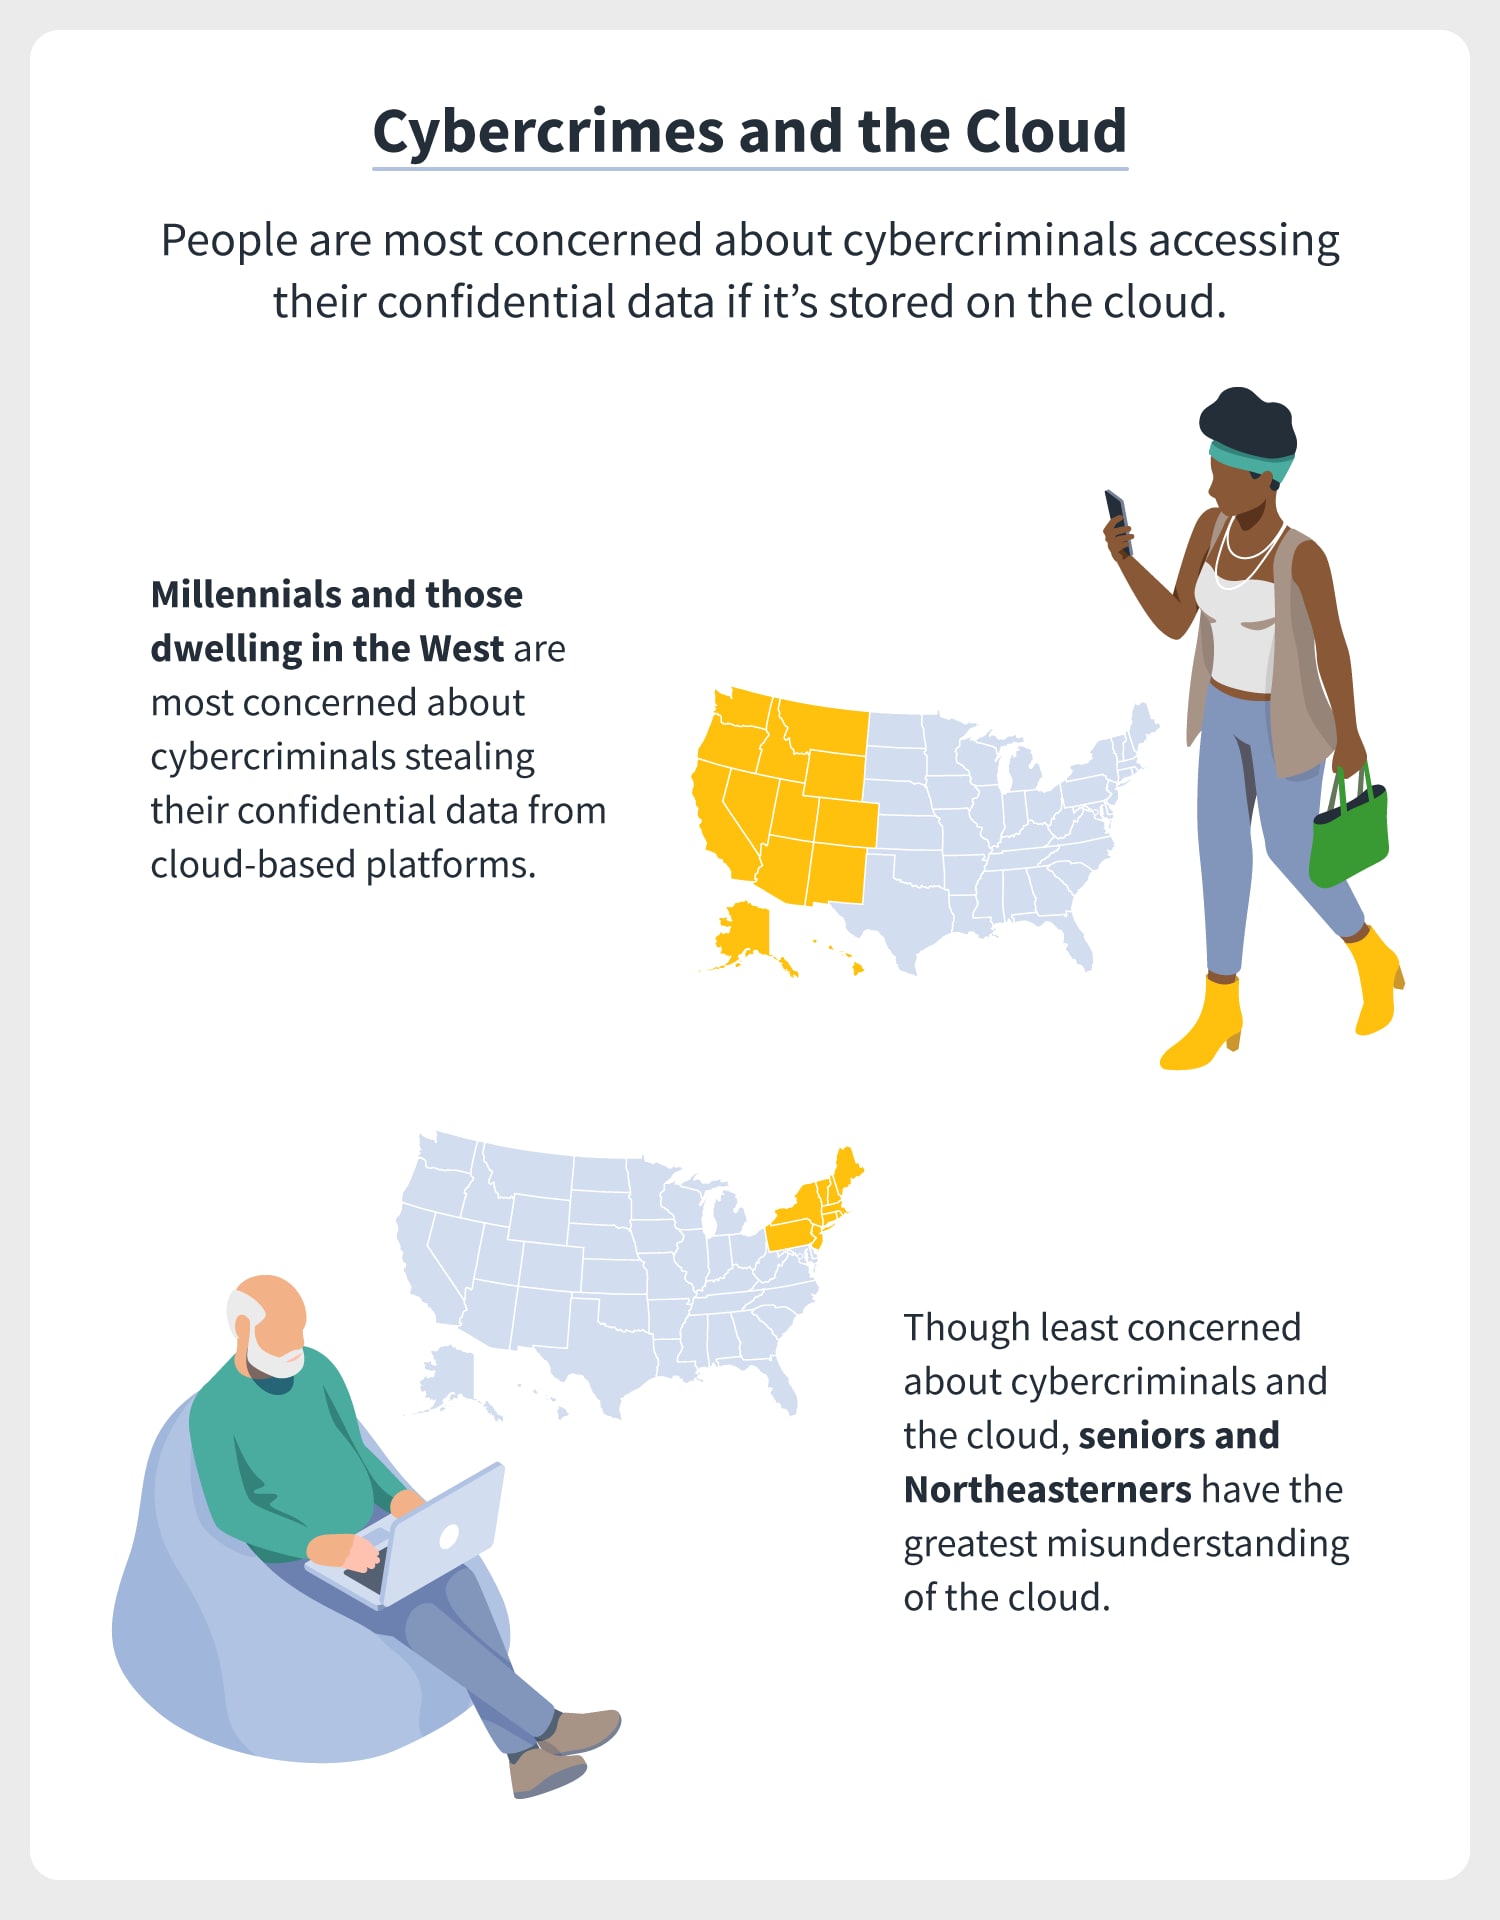 an overview of the confidential data survey results and the findings that Millenials and West Coasters are most concerned about cybercriminals stealing their confidential data from cloud-based platforms